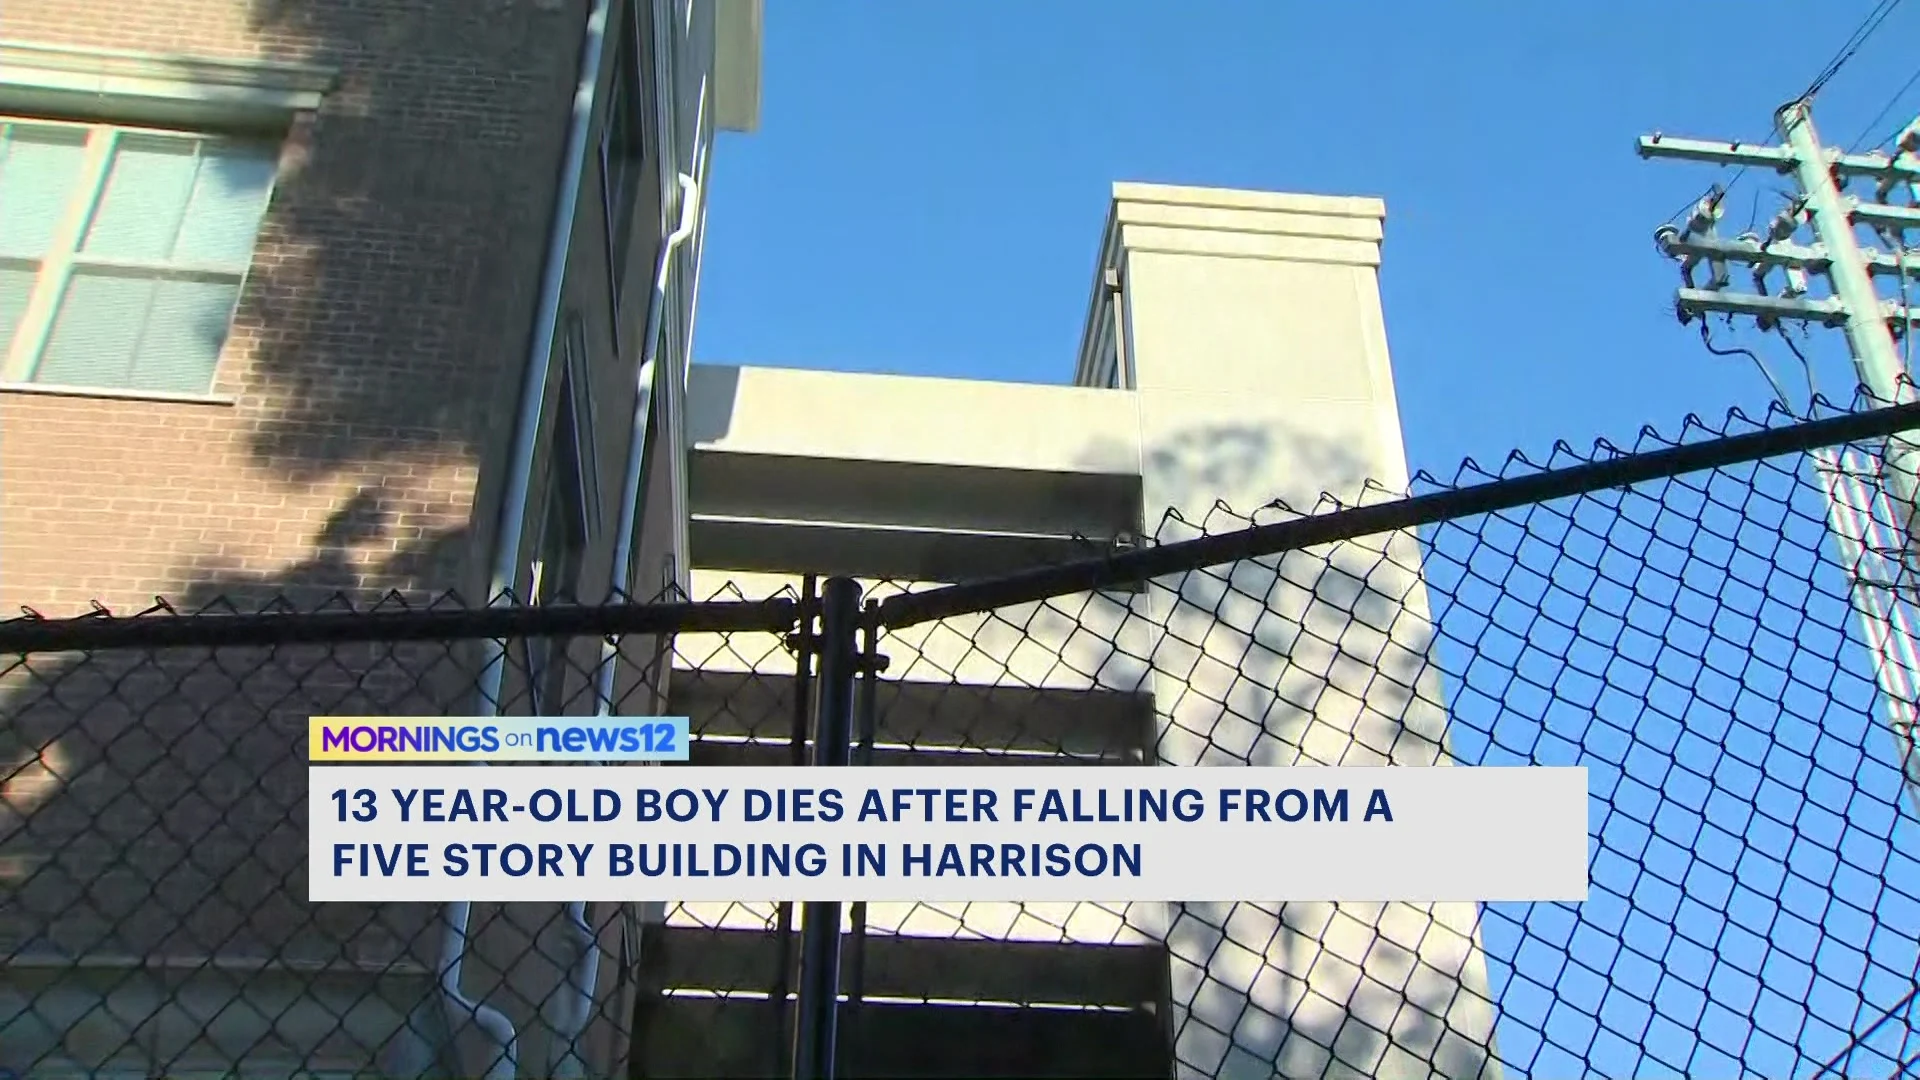 Harrison mourns death of 13-year-old boy after fall from building